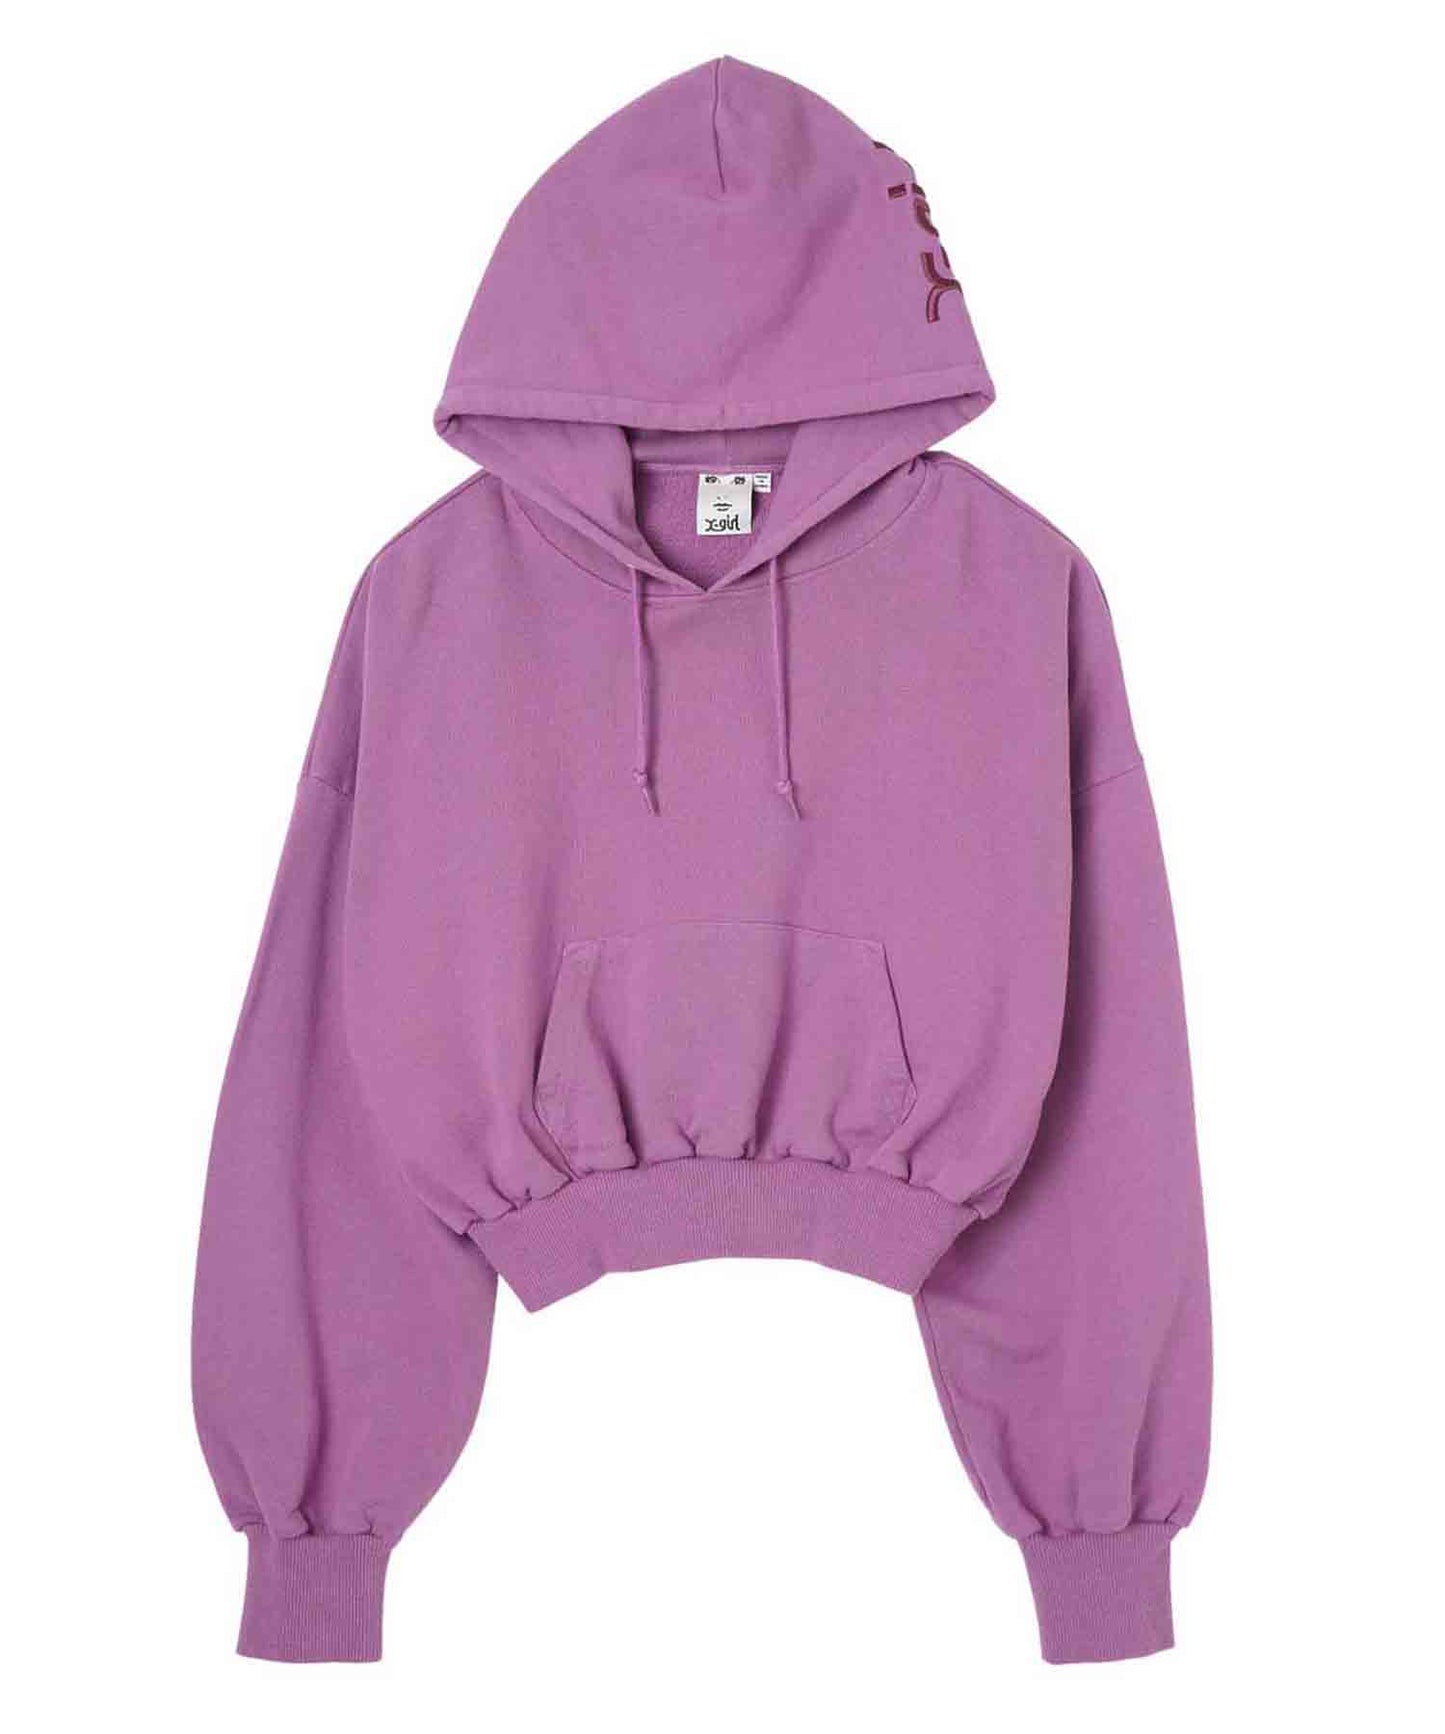 EMBROIDERED MILLS LOGO COMPACT SWEAT HOODIE